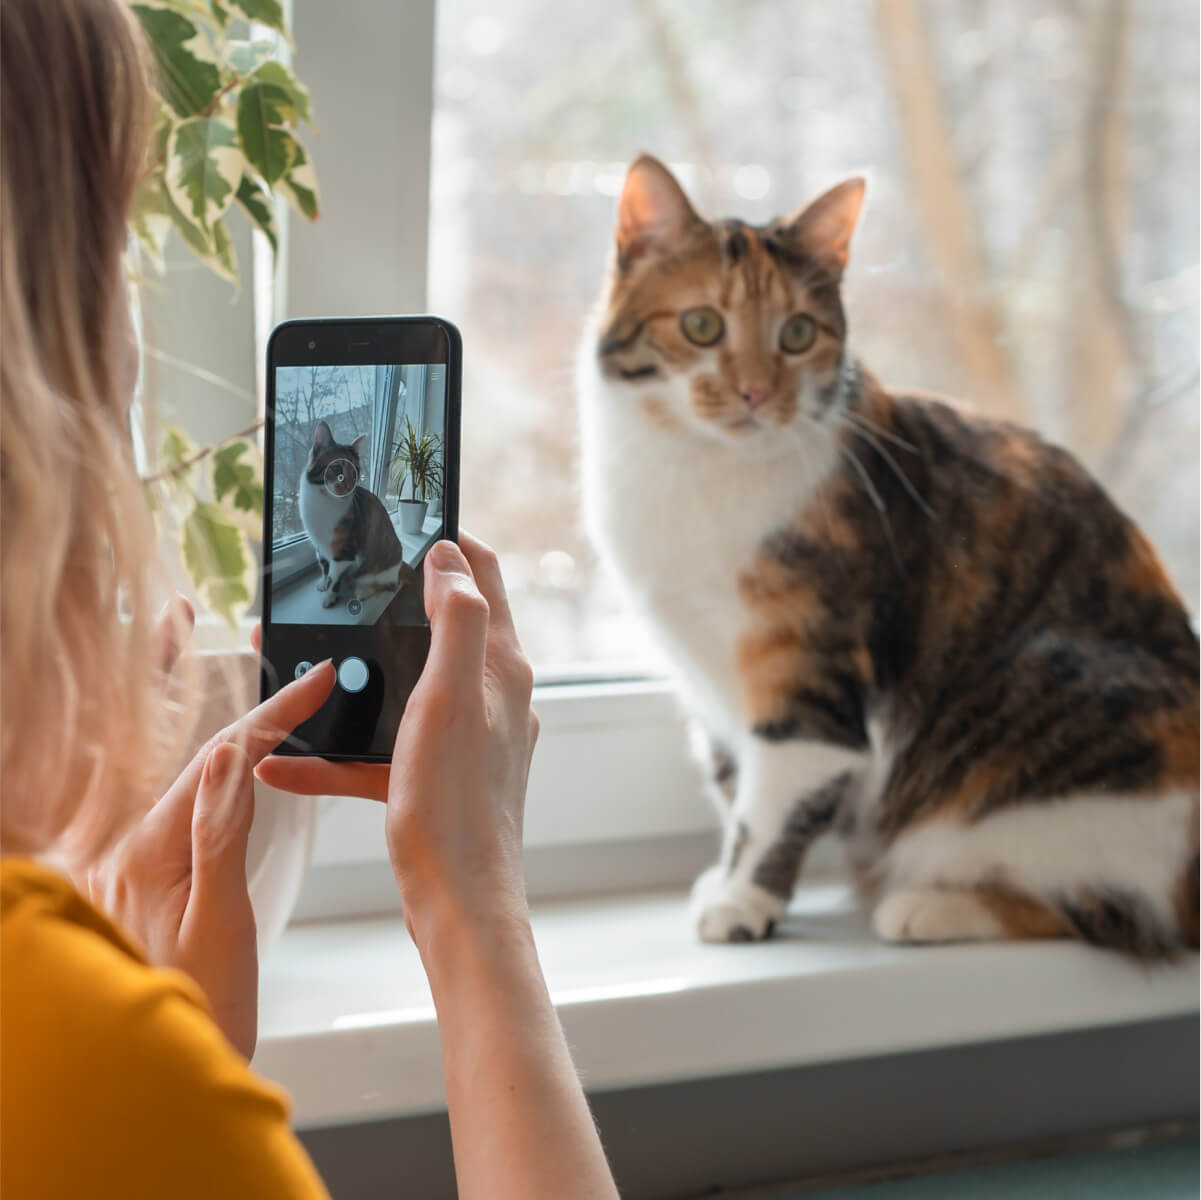 Post on social media - Woman taking picture of a cat